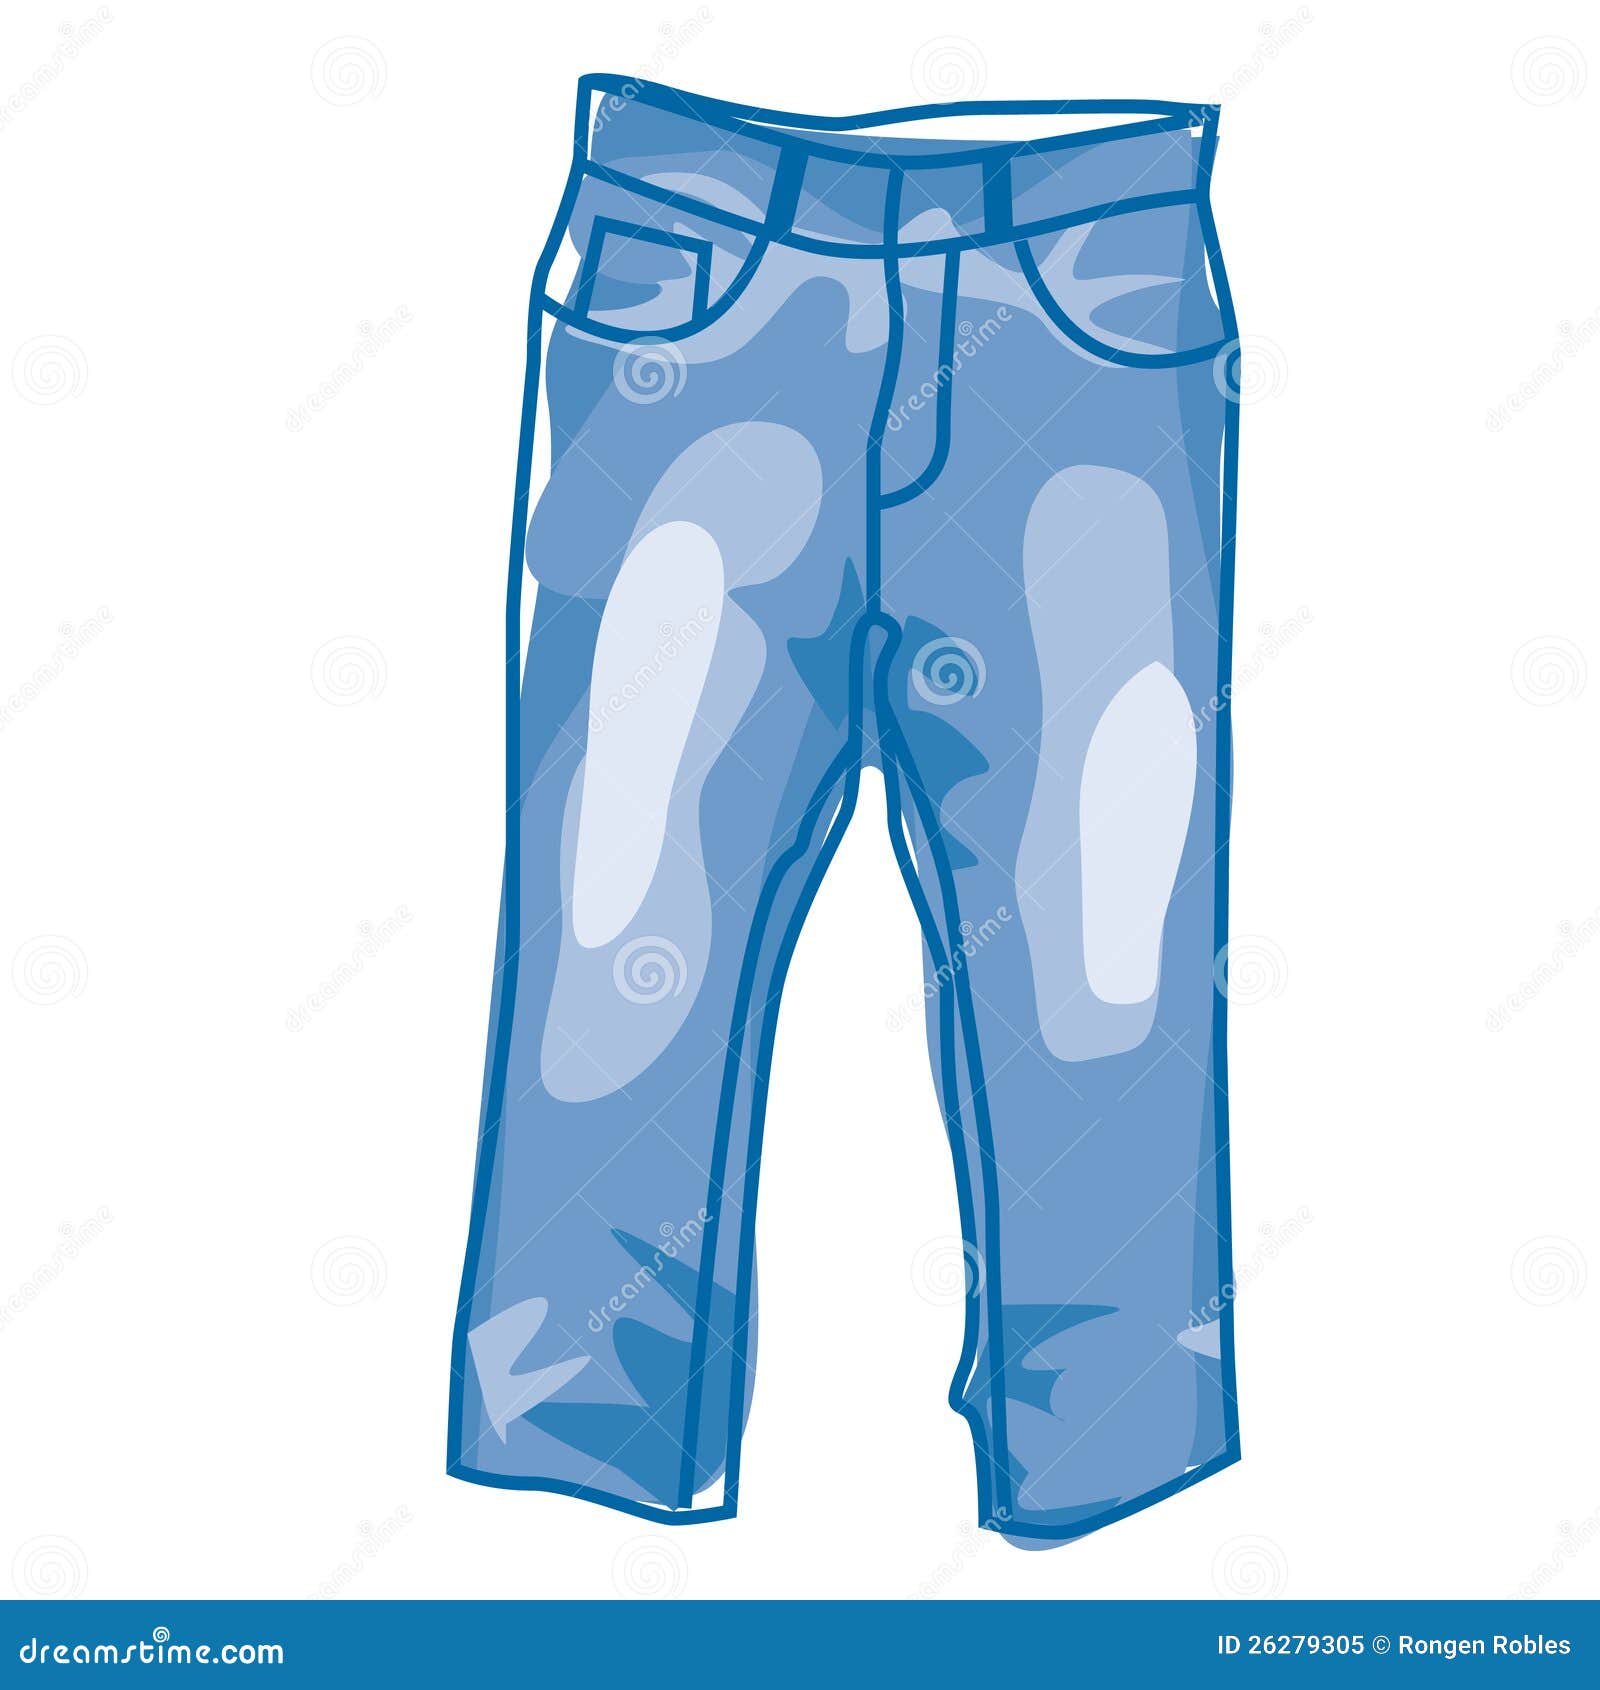 jeans clipart free - photo #22